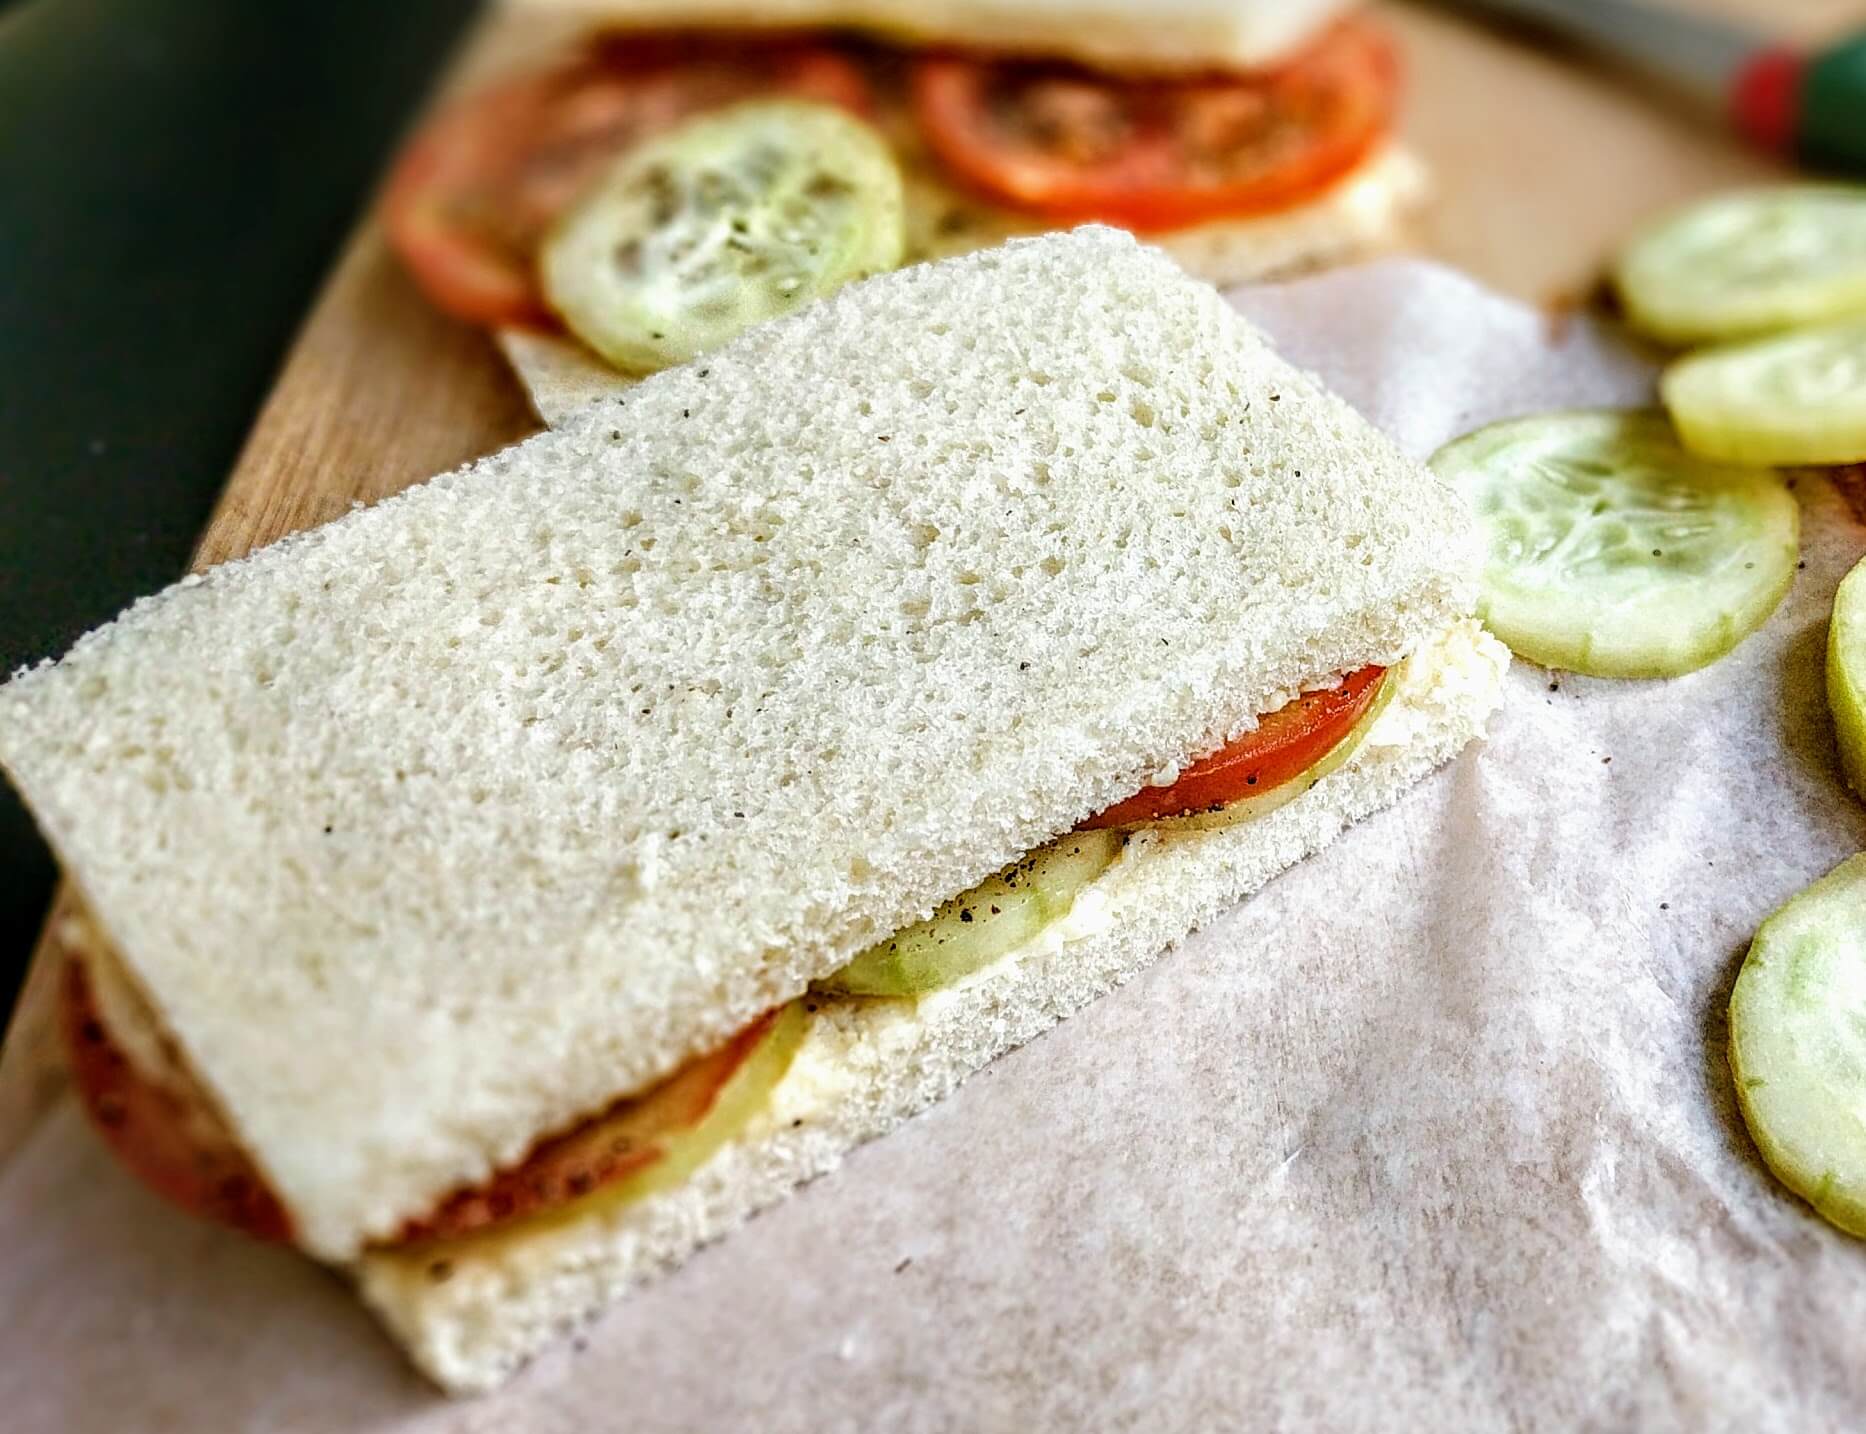 Tomato Cucumber Sandwich Recipe Step By Step Instructions